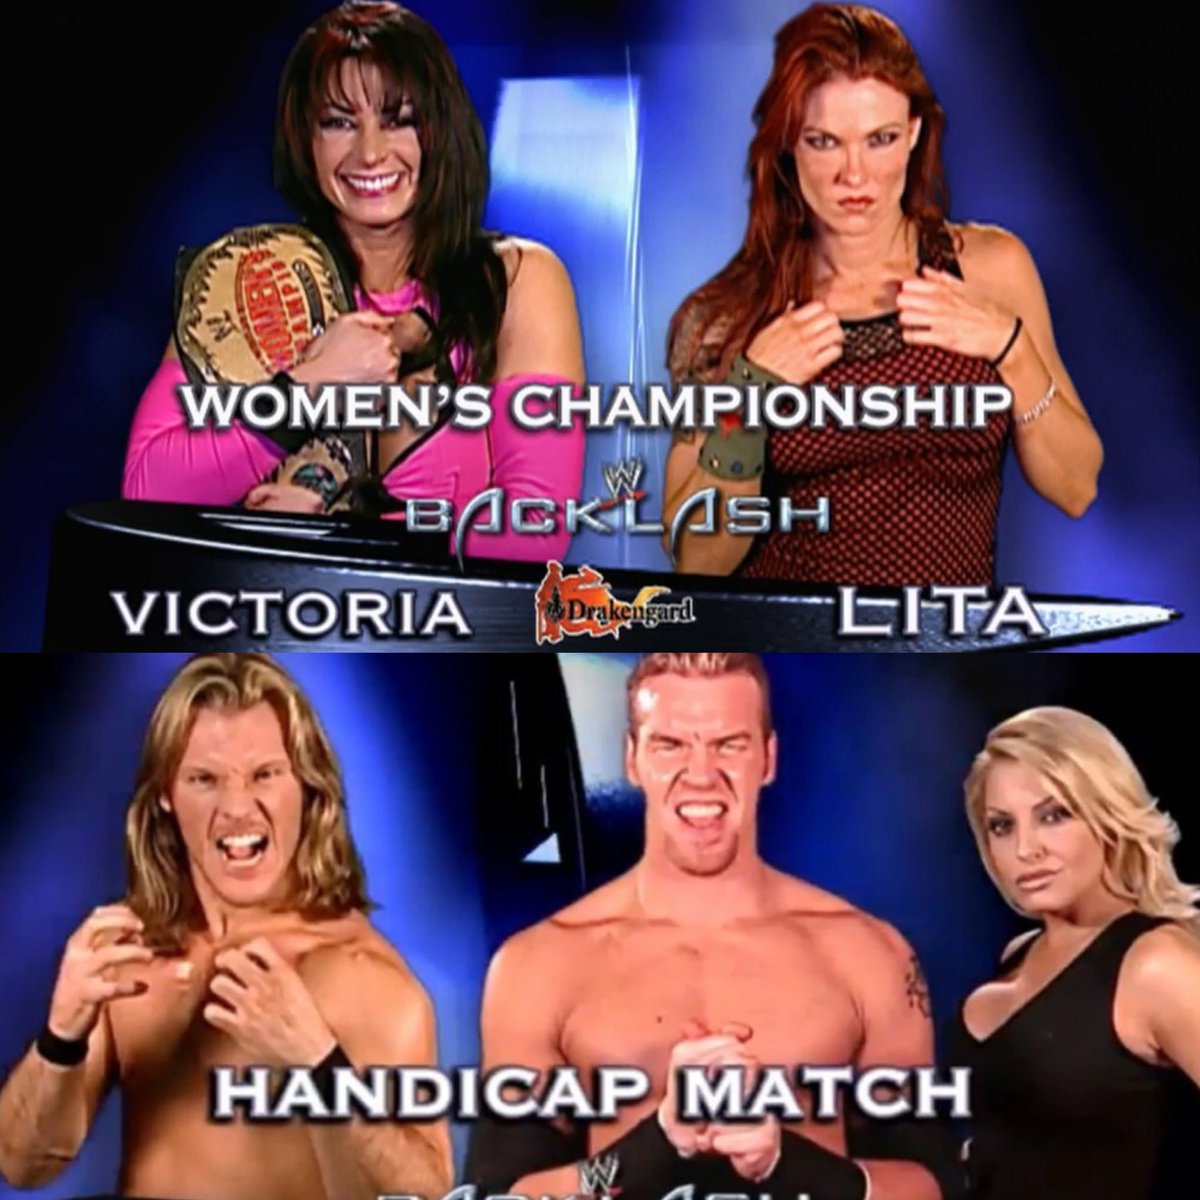 #OnThisDay in 2004, WWE Backlash took place. Trish Stratus & Christian took on Chris Jericho in a handicap match. Victoria put her title on the line against Lita. https://t.co/wjSInAZGIK